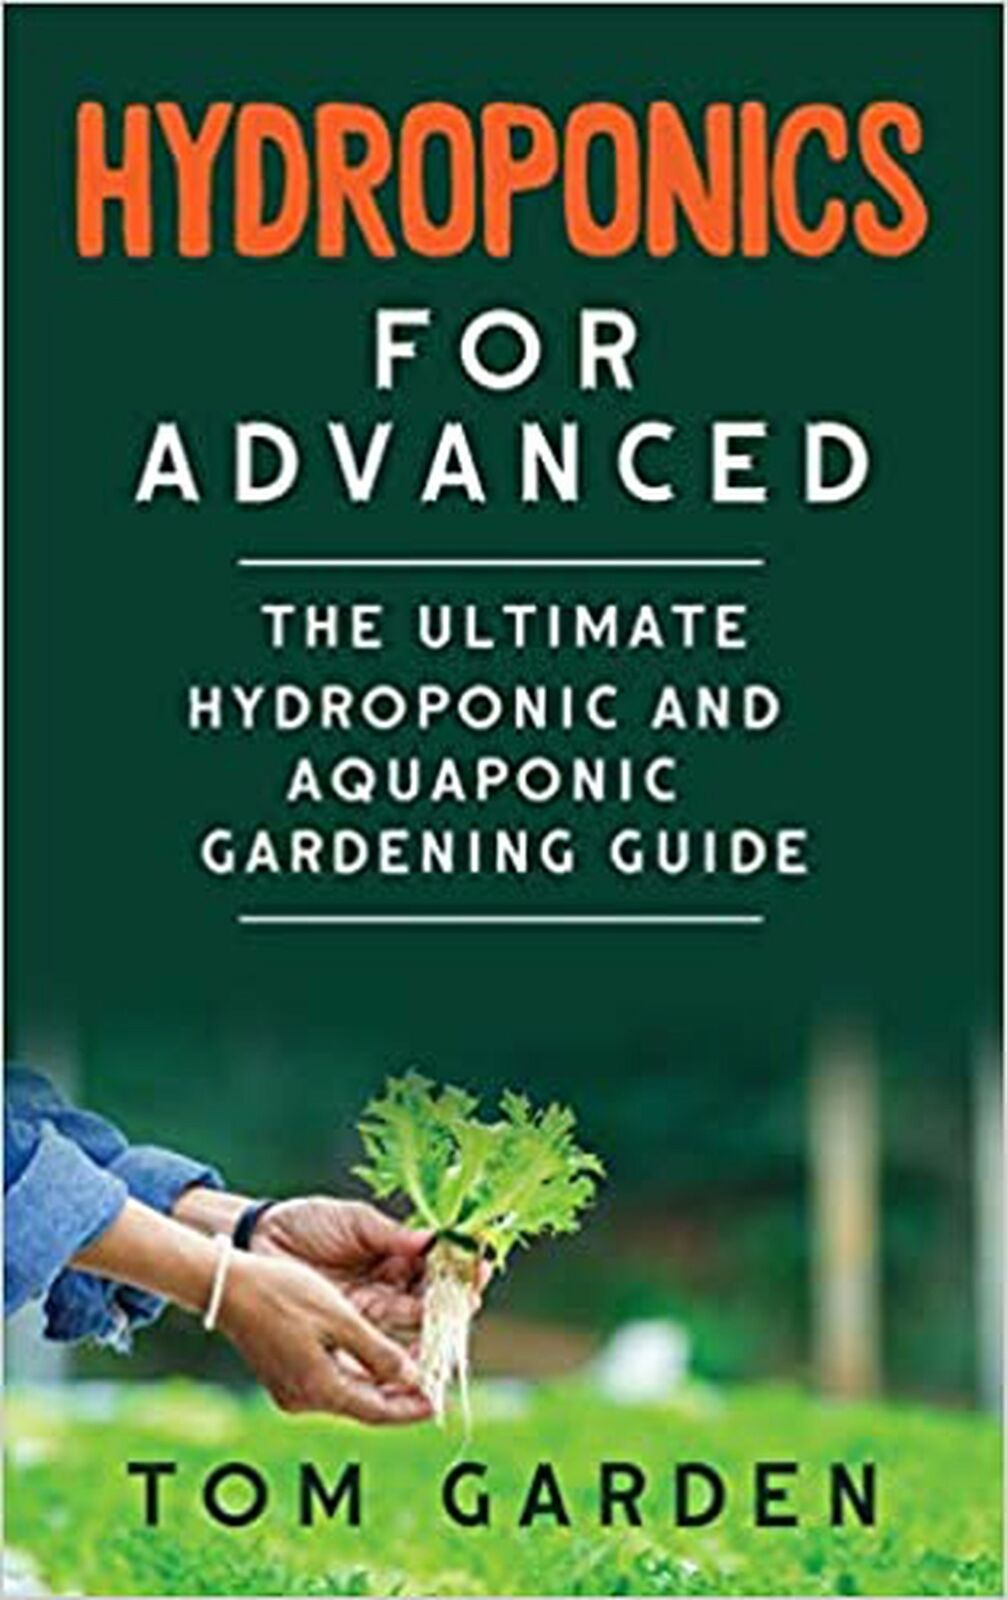 Hydroponics for Advanced: The Ultimate Hydroponic and Aquaponic Gardening Gui...